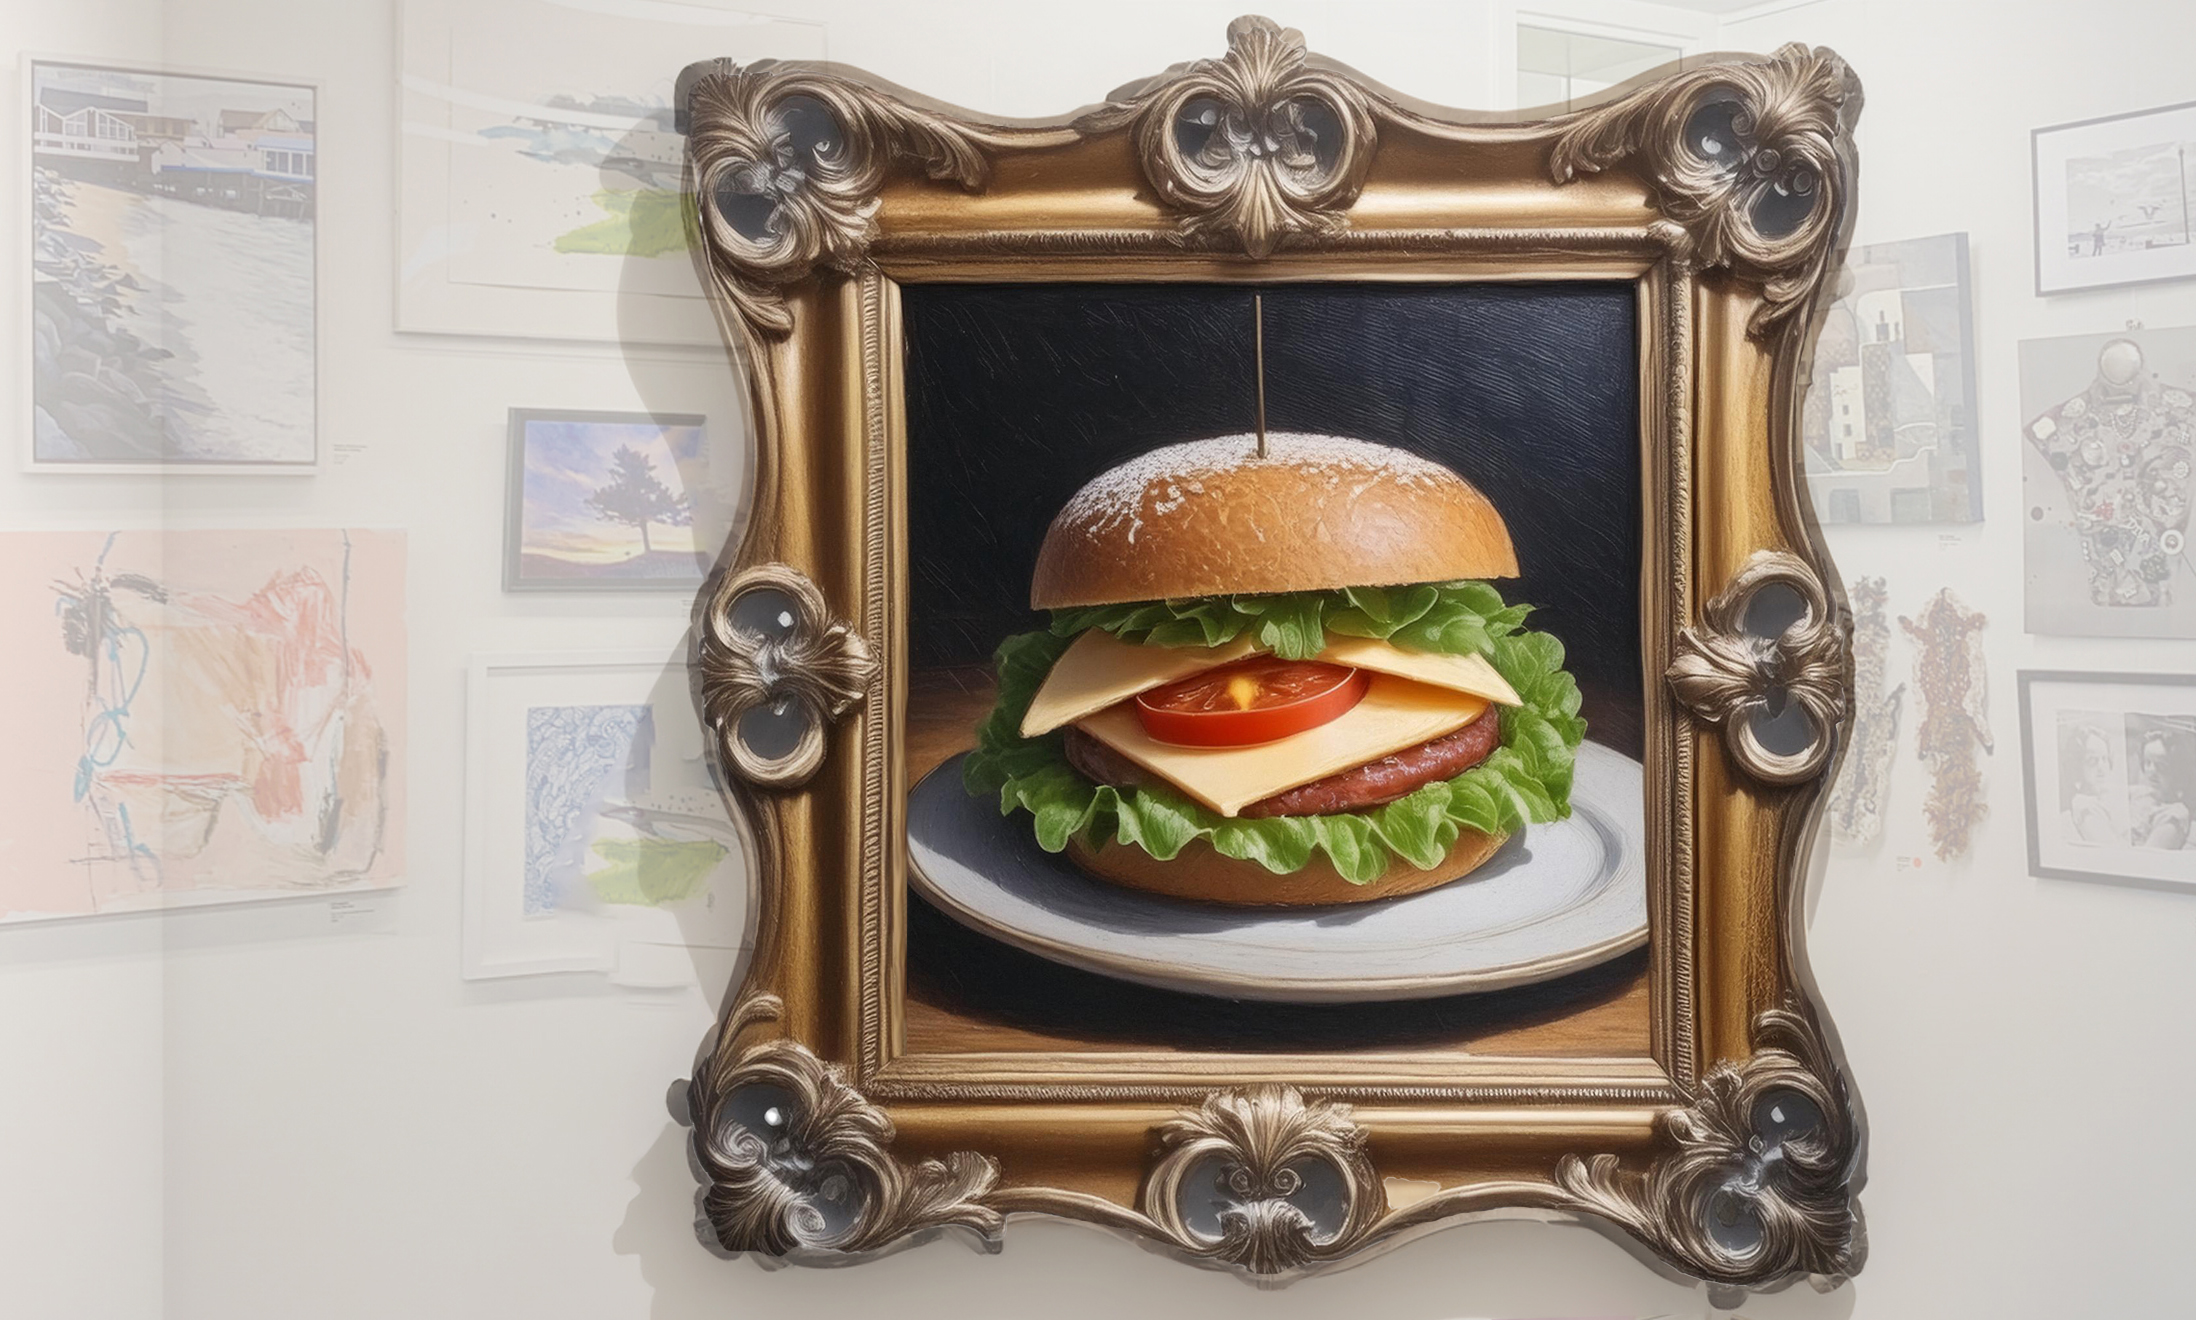 Picture of a cheeseburger inside an ornate frame